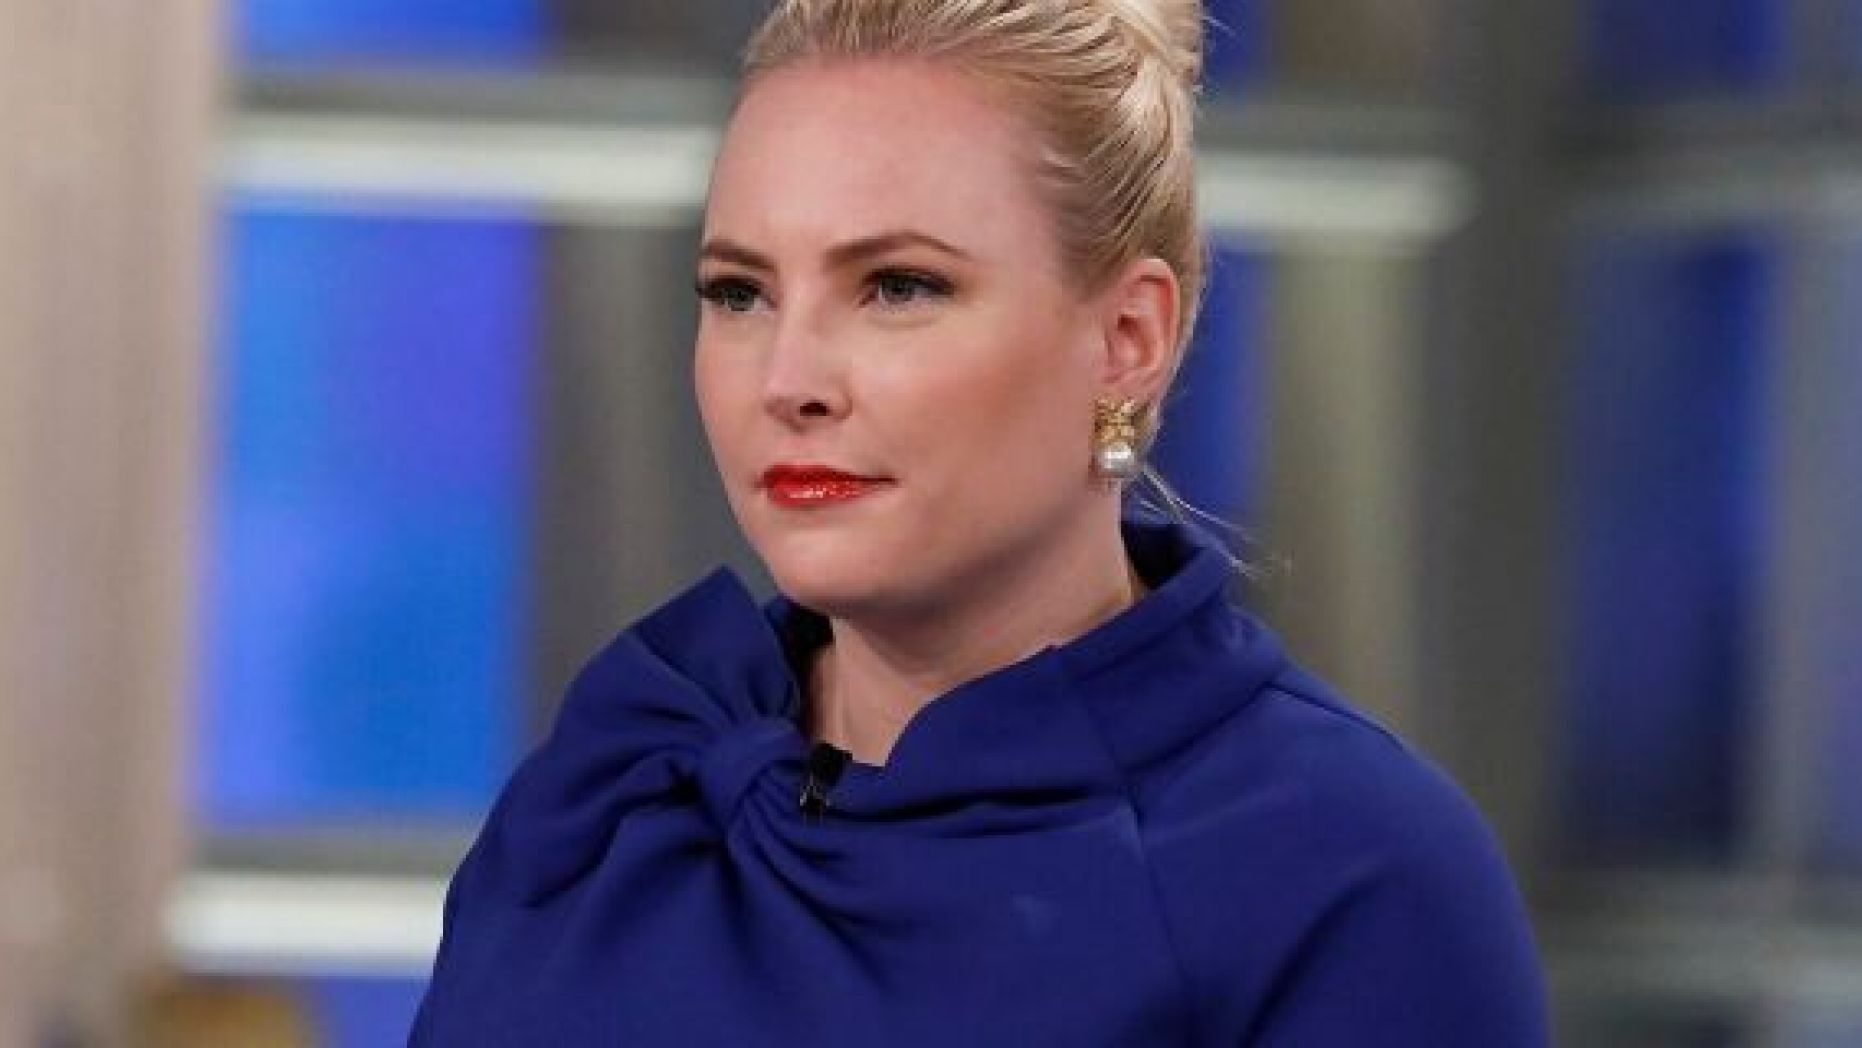 “The View” co-host Meghan McCain apologized after spoiling the finale of “Game of Thrones.”